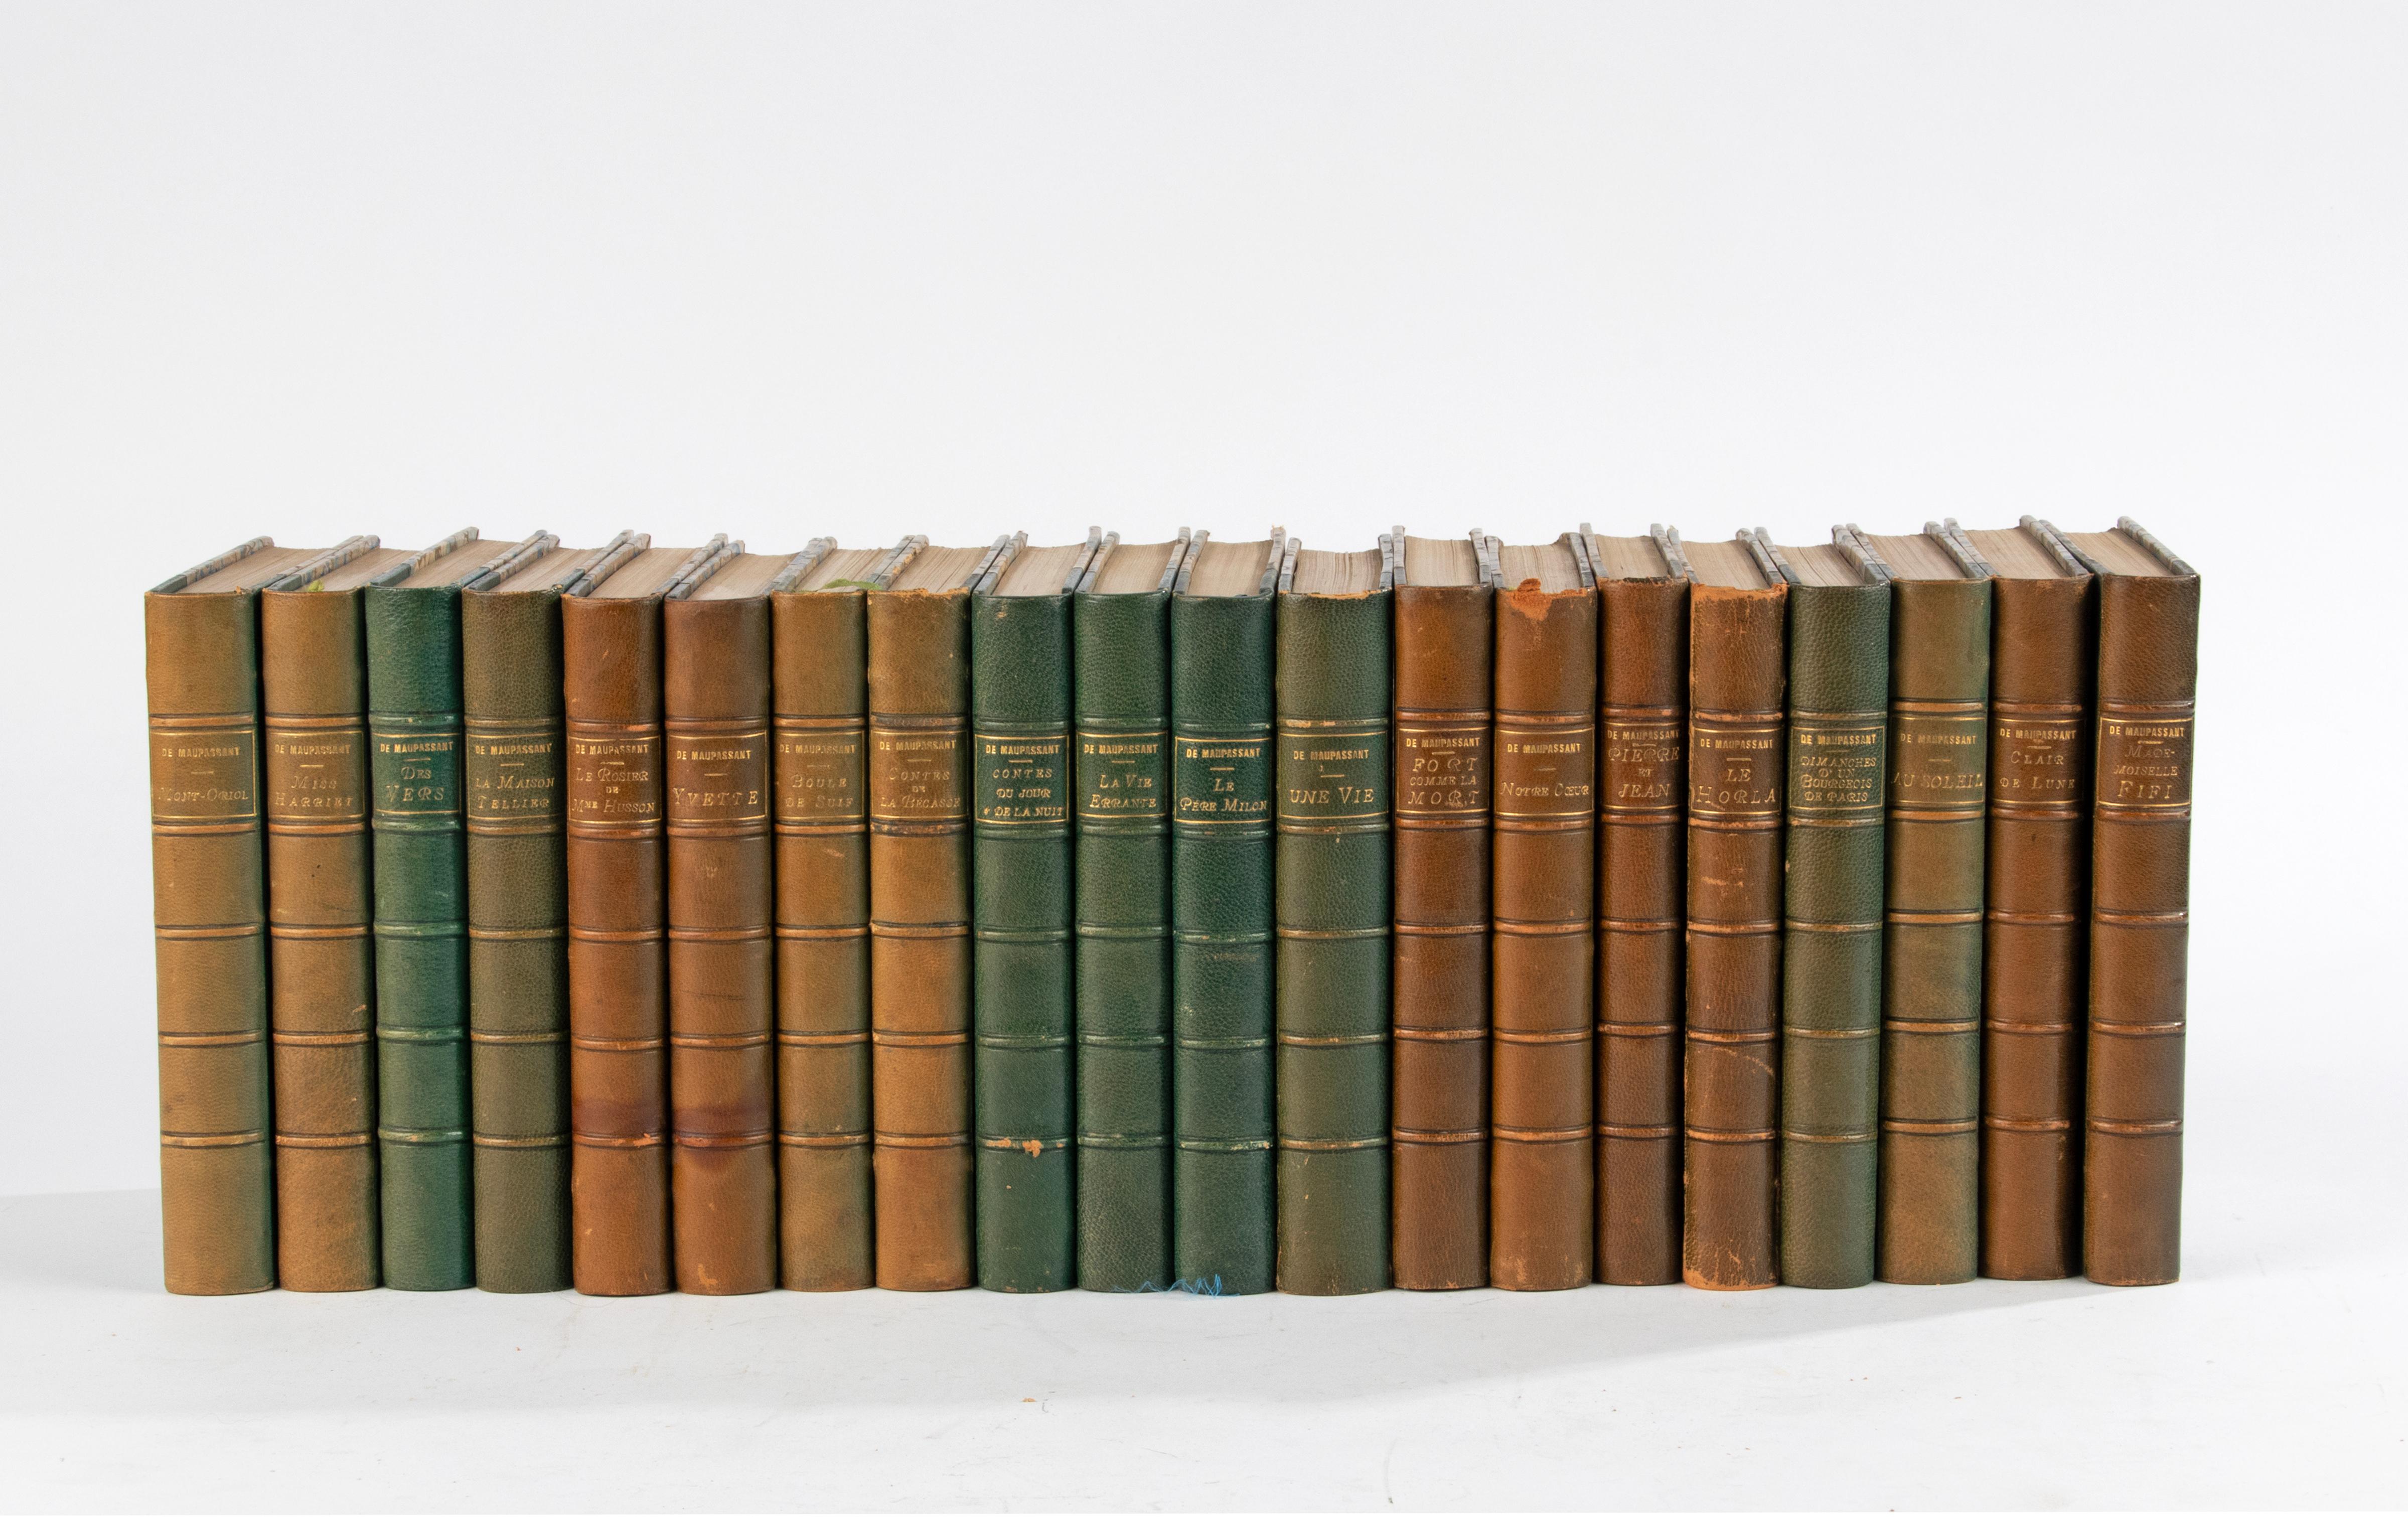 A set of 20 antique French books from the De Maupassant series.
These books can beautifully decorate your bookcase or office. These books are not too big, fits in every bookcase. The leather spines with gold print are in good condition. inside is